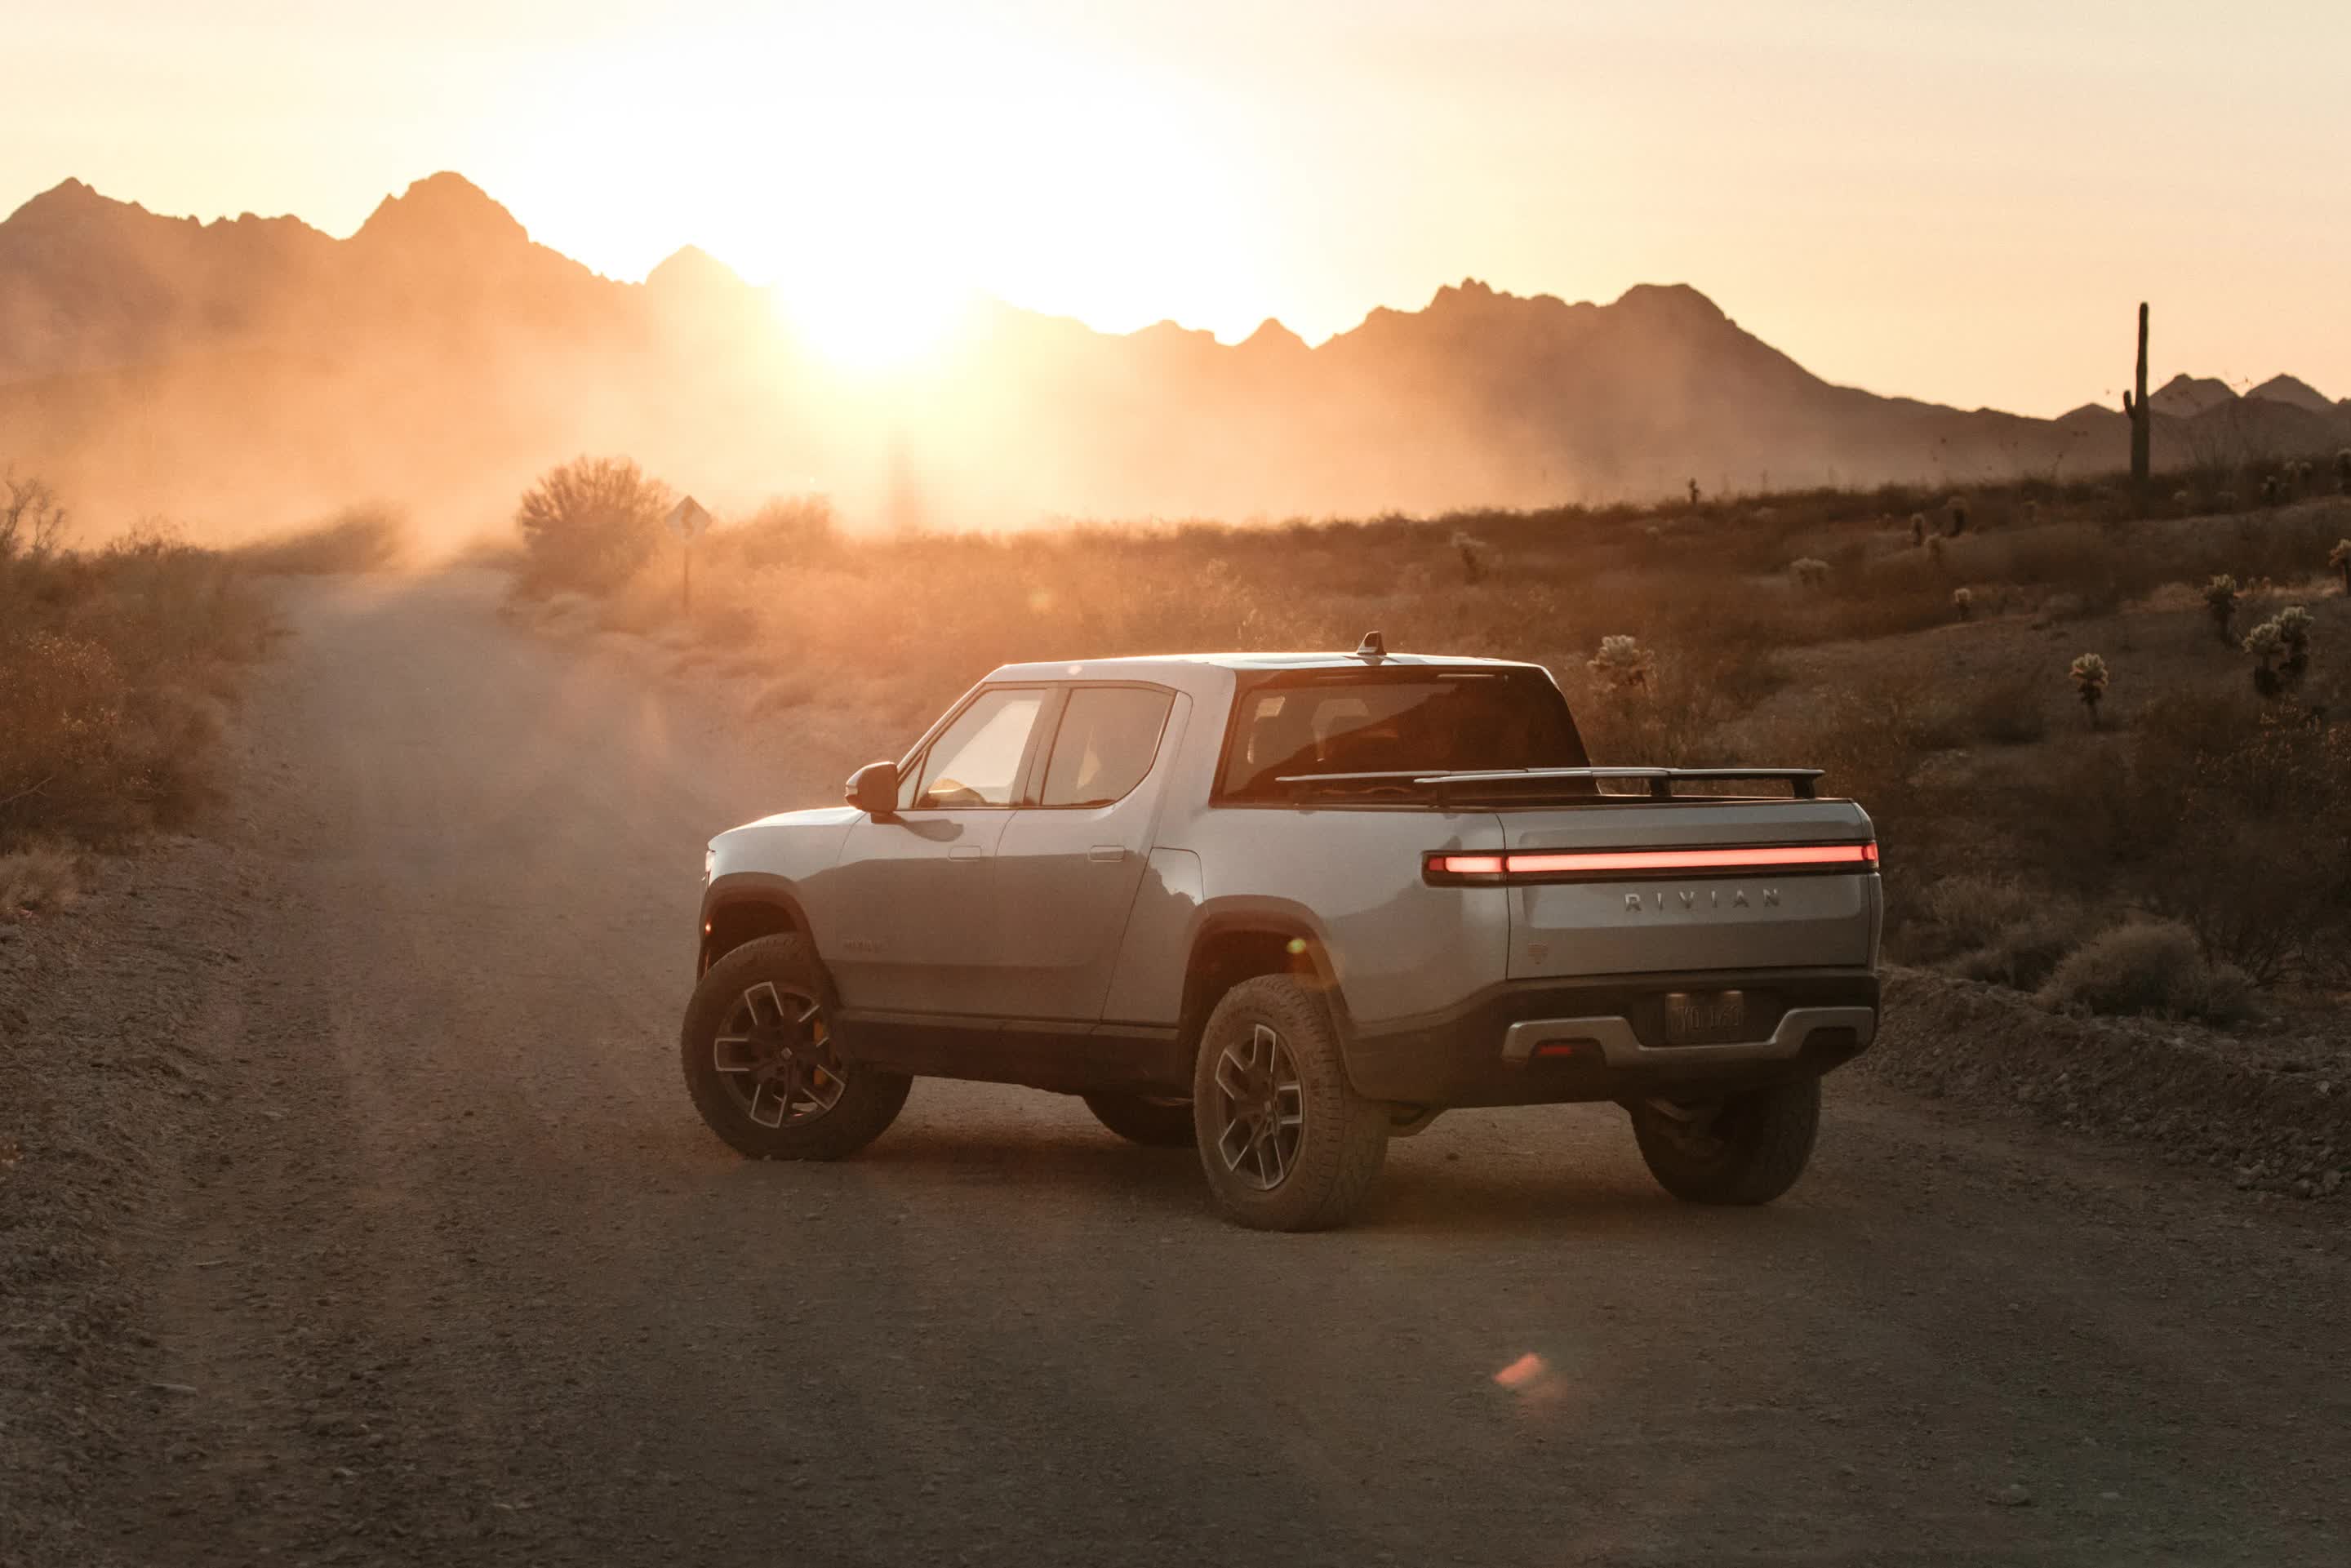 Rivian recalls more than 12,000 vehicles due to potential steering loss